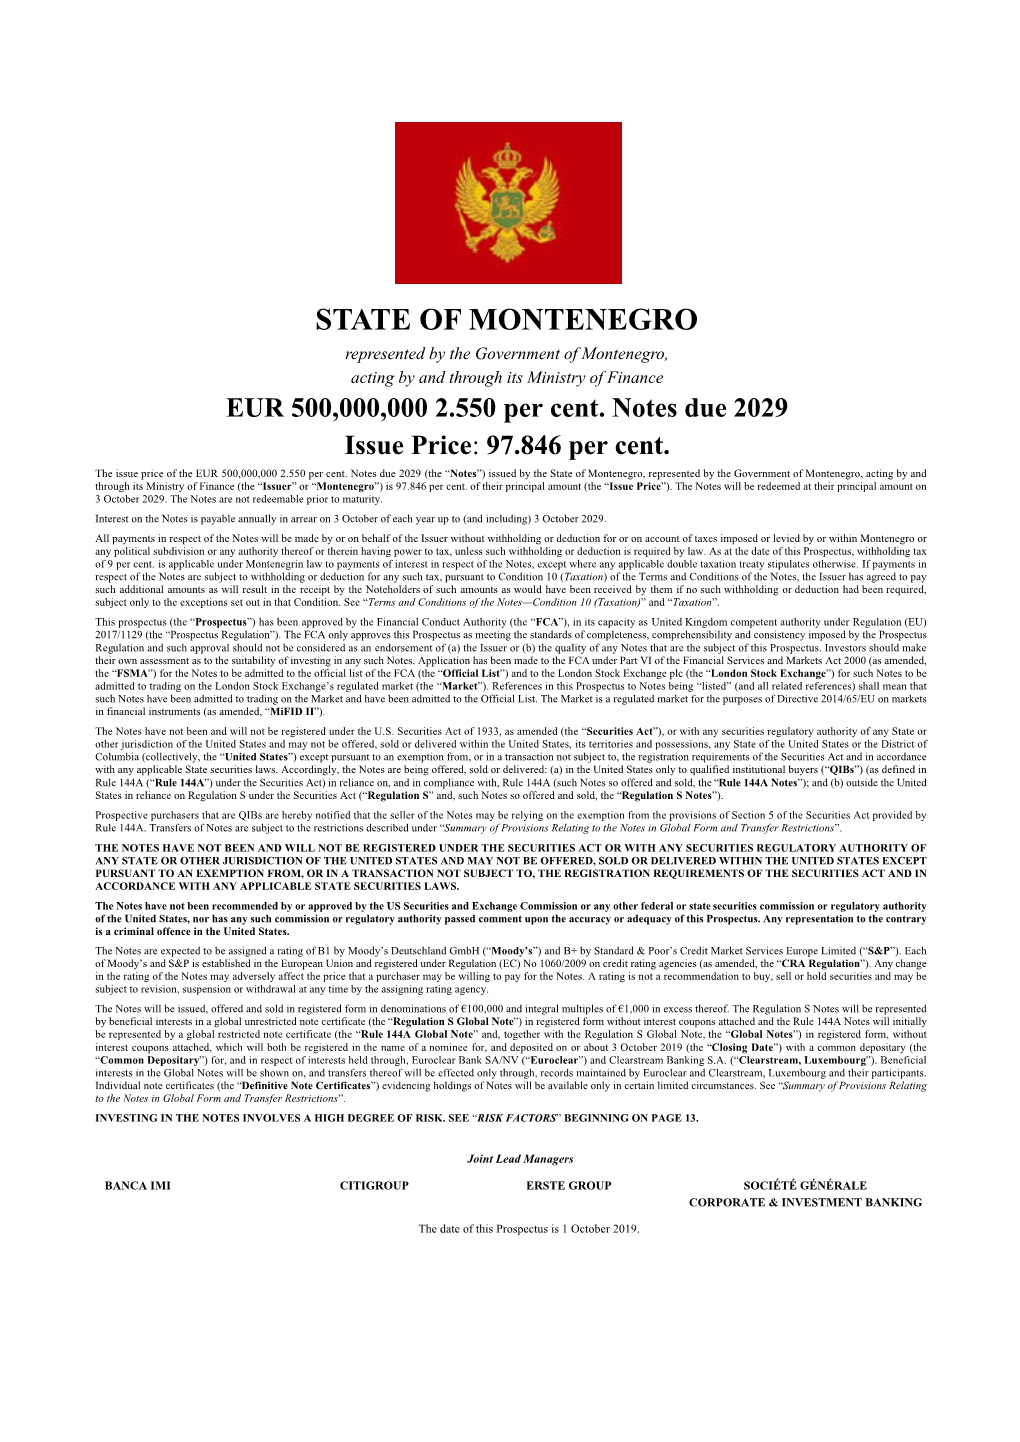 STATE of MONTENEGRO Represented by the Government of Montenegro, Acting by and Through Its Ministry of Finance EUR 500,000,000 2.550 Per Cent